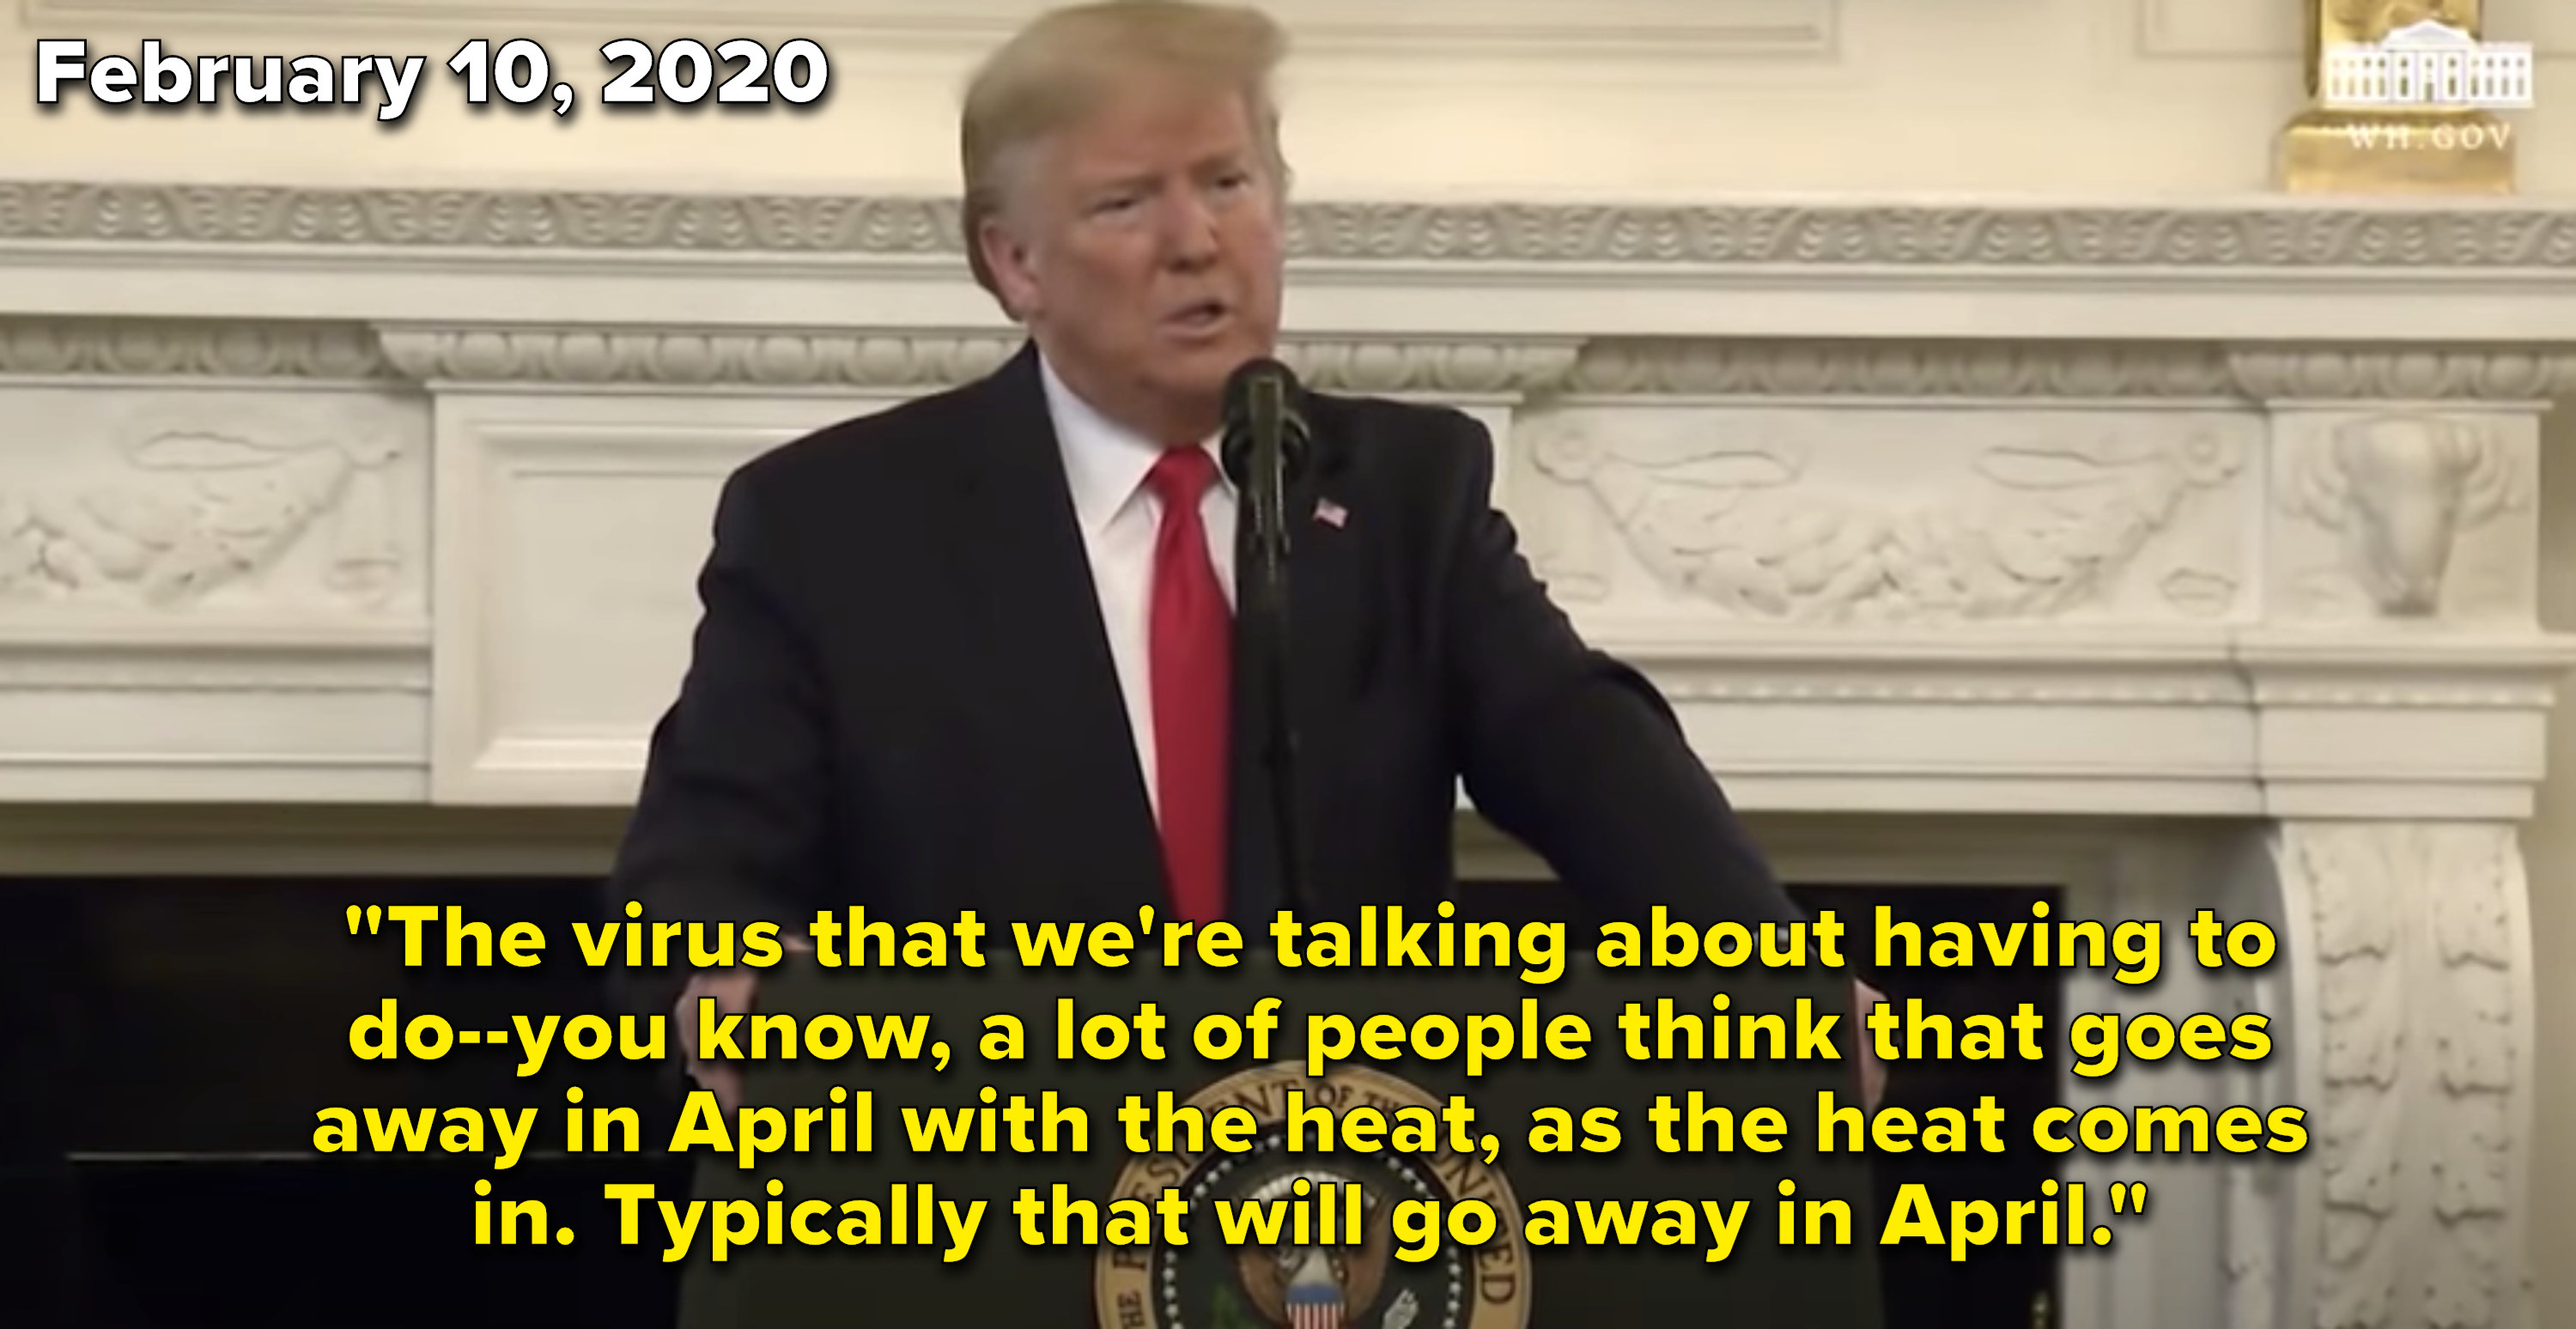 Trump lying to reporters at the White House about the coronavirus